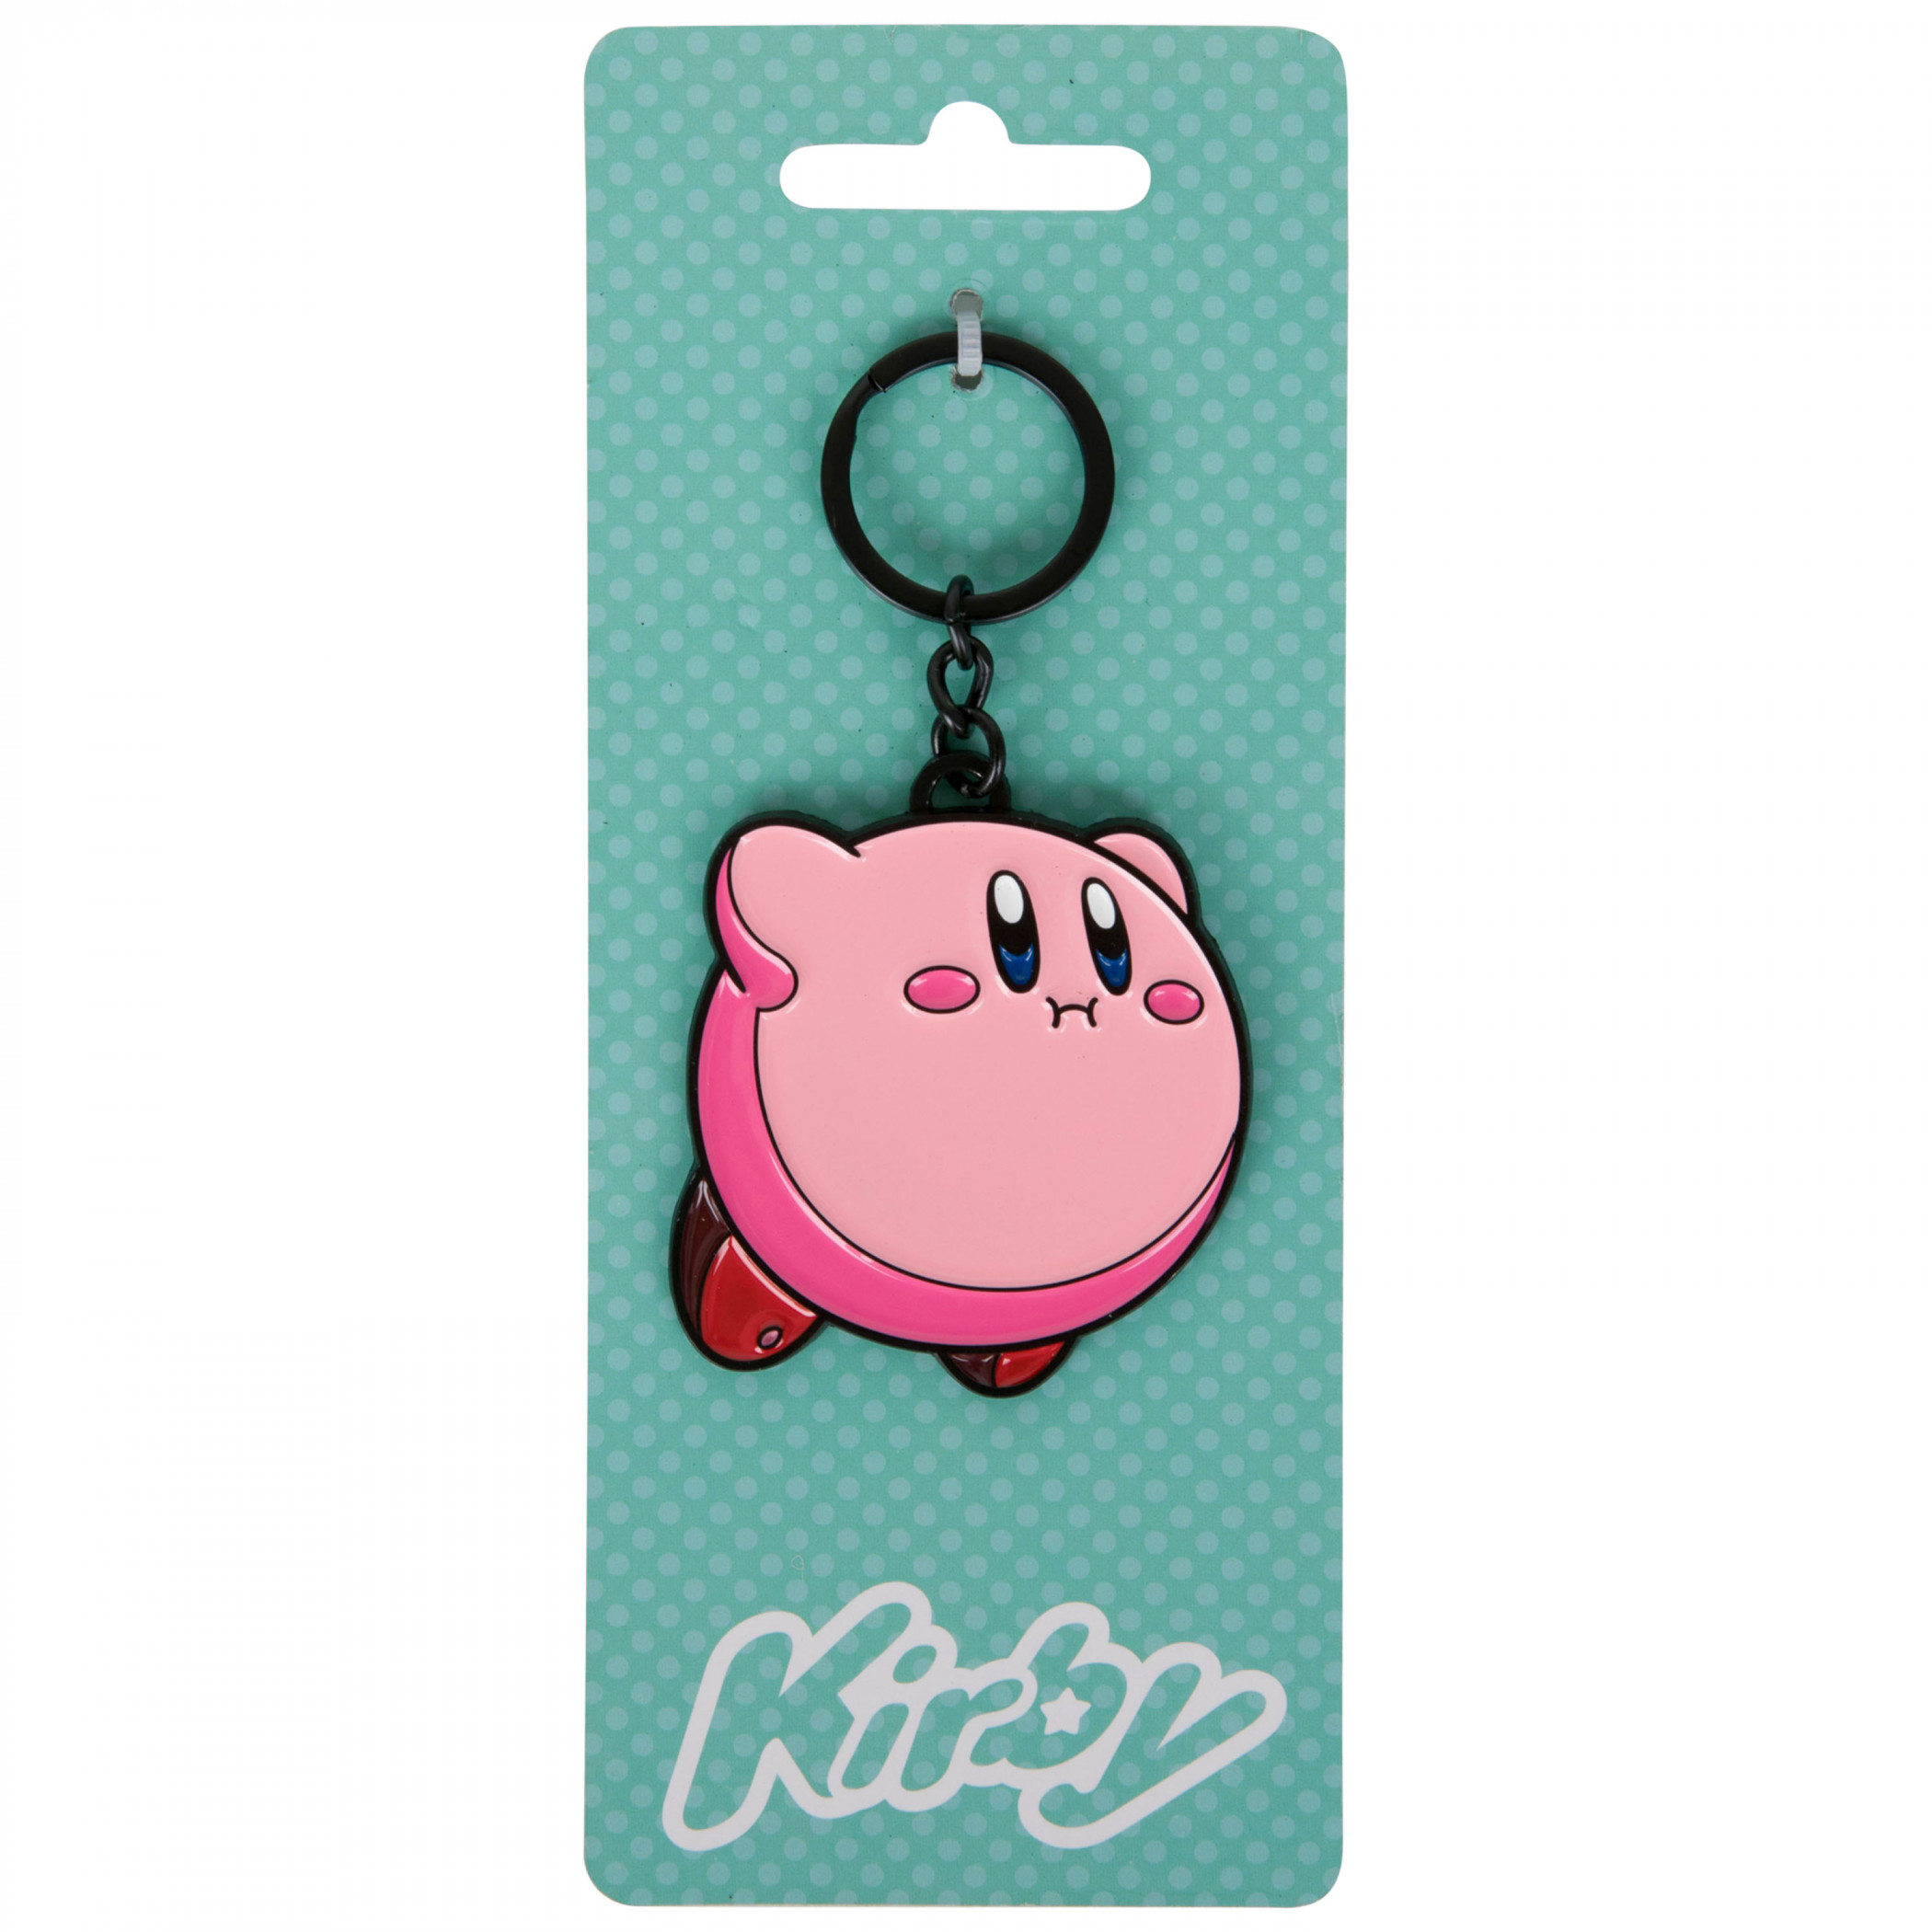 Kirby Floating Rubber Charm Keychain